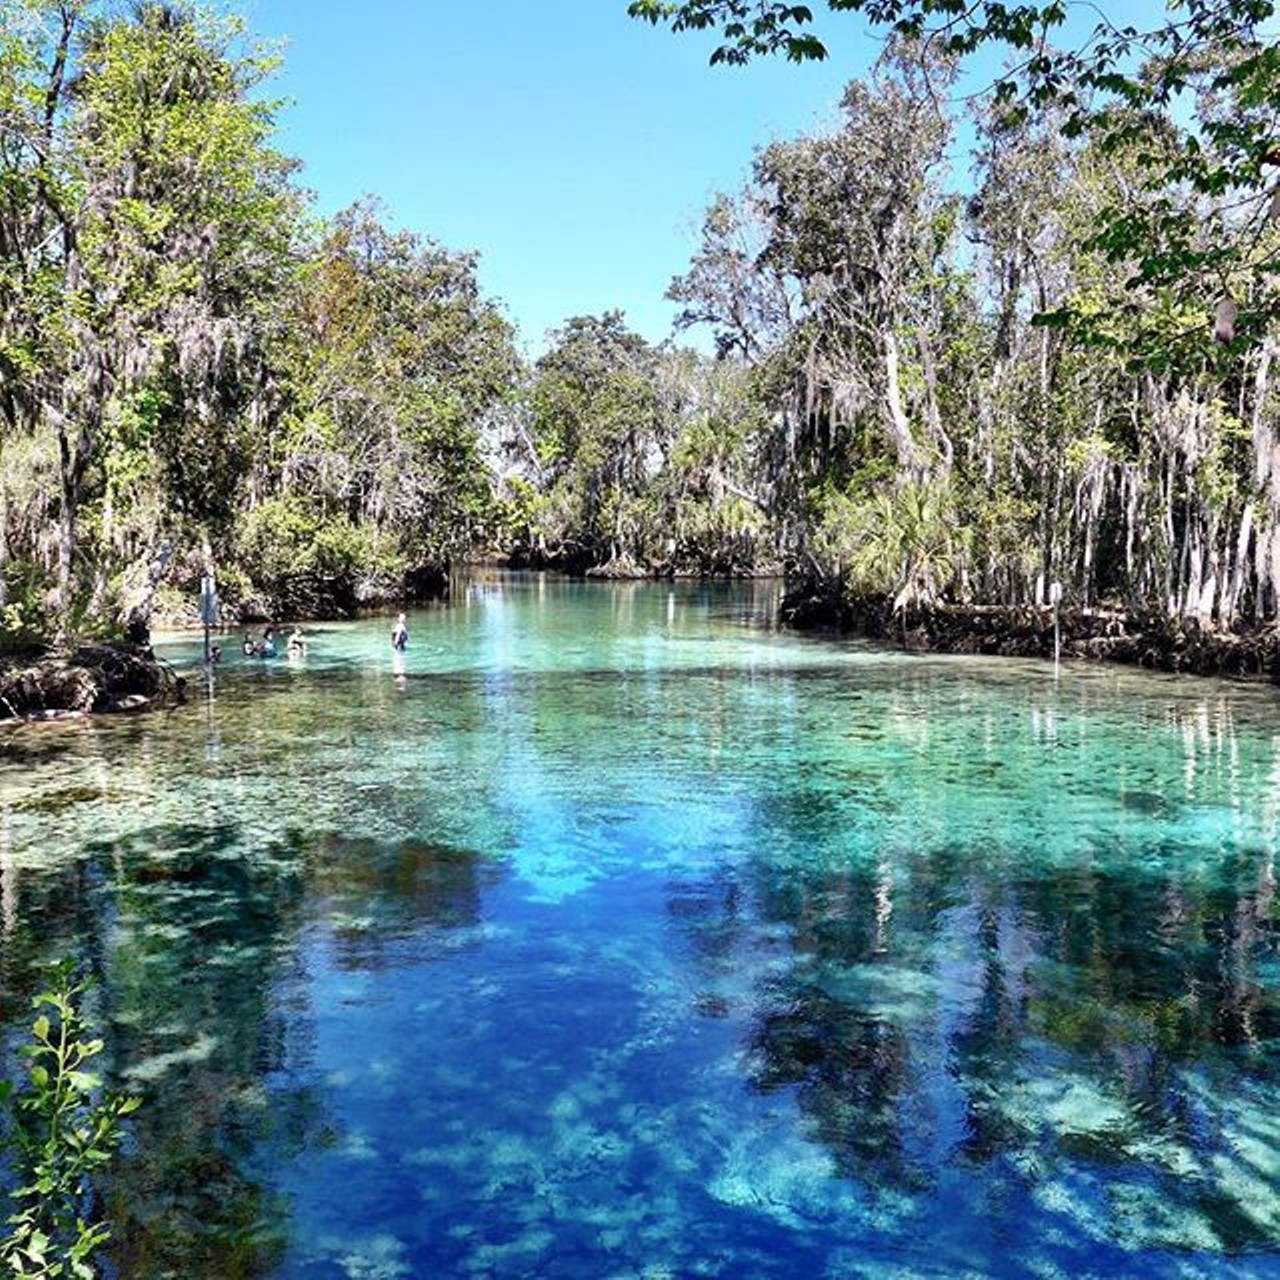 Three Sisters Springs
915 N. Suncoast Blvd., Crystal River, FL 34429 
Estimated travel time: 1 hour, 38 minutes from Orlando
This one is just for the manatees, folks. Swim with the cute lil sea cows or simply look at them from the spring&#146;s boardwalk. Either way, you&#146;ll get a clear view of them. The amount of manatees on site fluctuates depending on the time of year, but the cooler days after mid-November will get you more mammal for your buck. This spring made headlines after hundreds of the manatees huddled together to keep warm.
Photo via kimgentle/Instagram